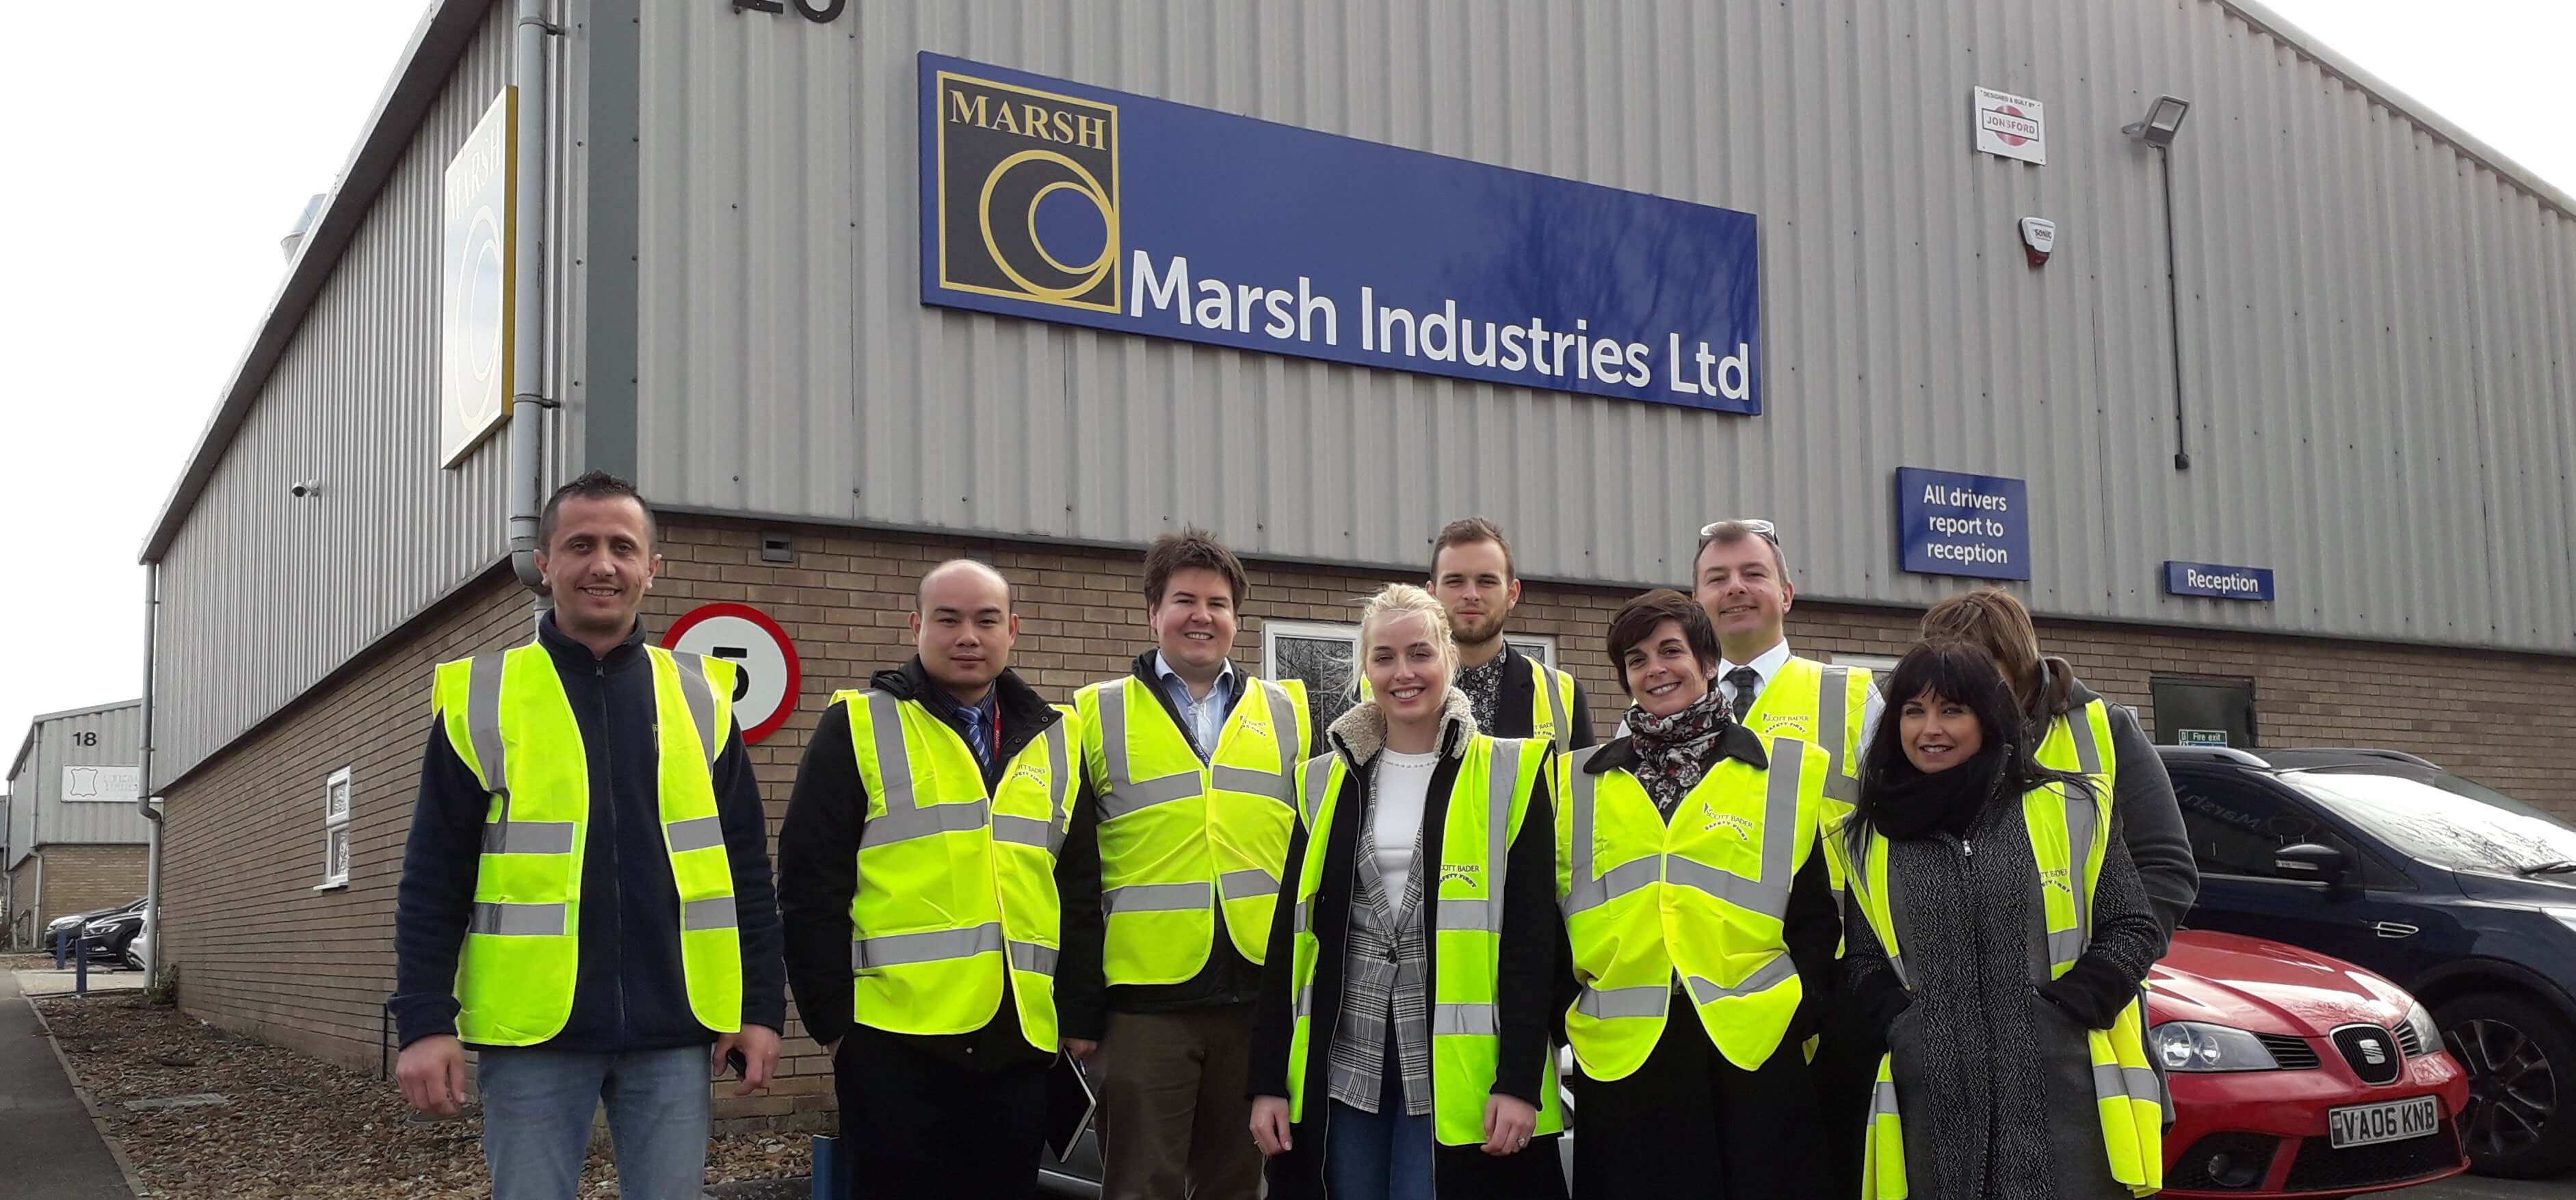 European colleagues from Scott Bader attend training day at Marsh Industries